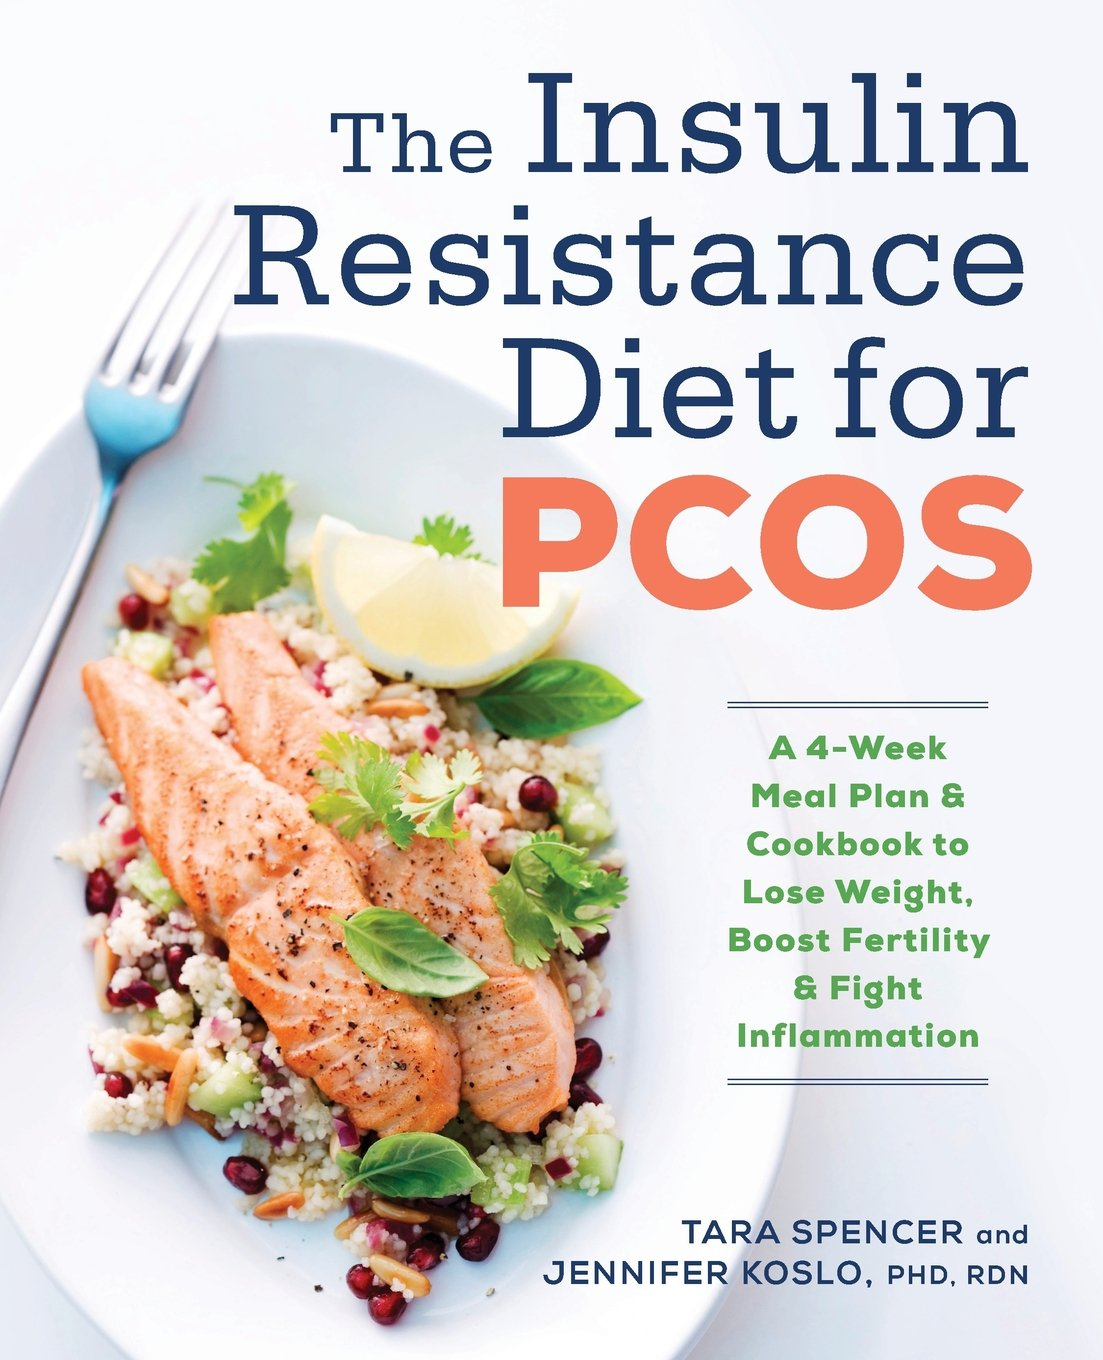 The Insulin Resistance Diet For Pcos A 4 Week Meal Plan 